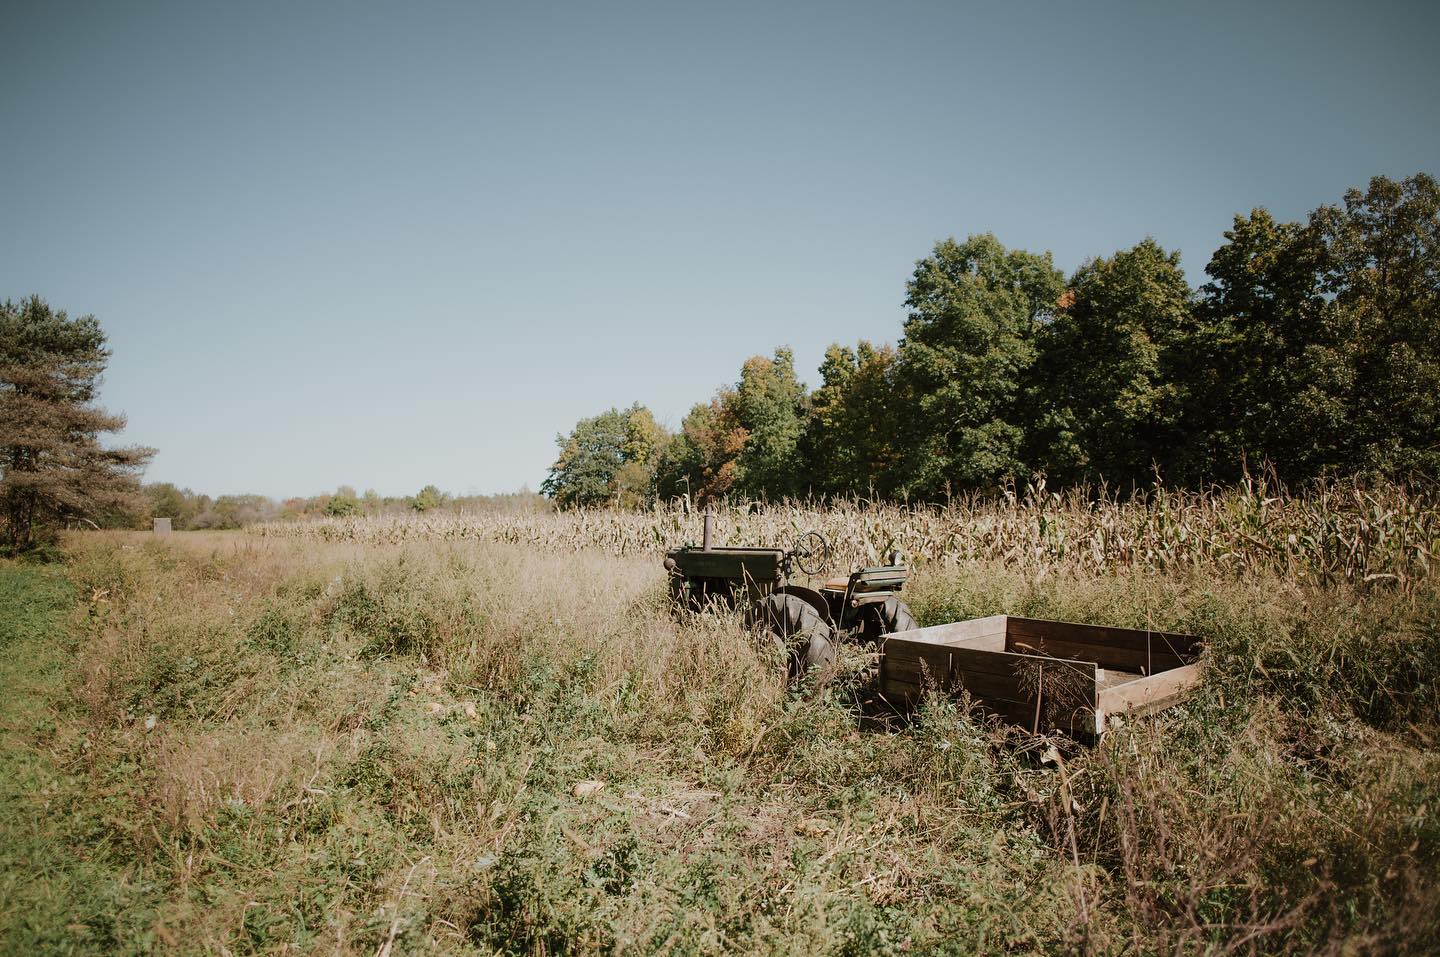 day twenty-one: landscape.

this is the landscape of one of my favorite places, my grandpa’s house. 🥰

fun fact: my grandpa bought this tractor when he was 17!

#waylandfallchallenge